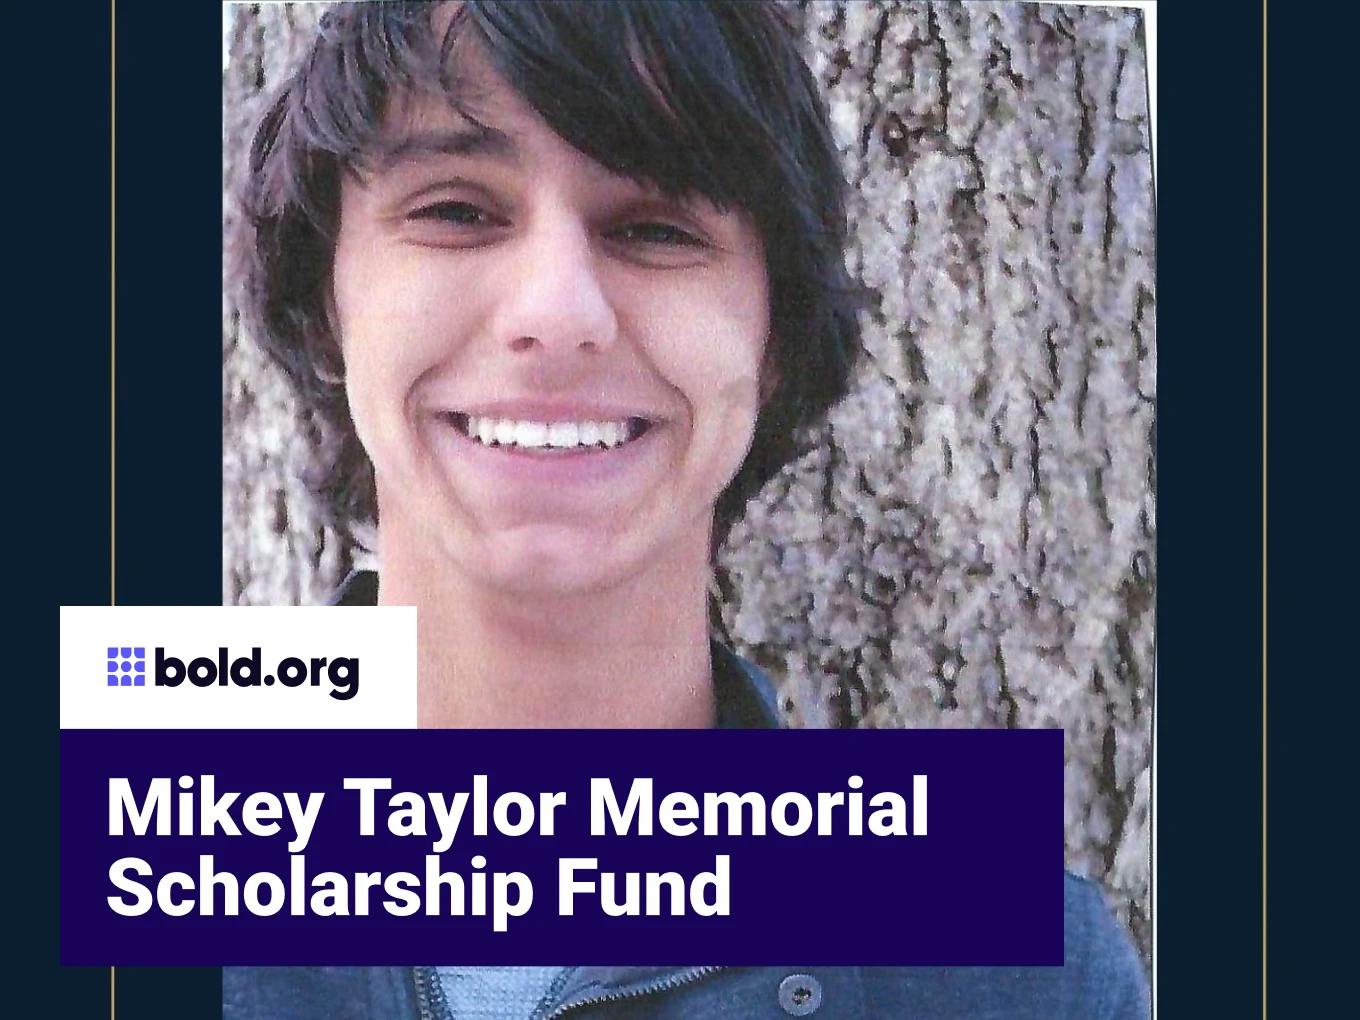 Mikey Taylor Scholarship Fund